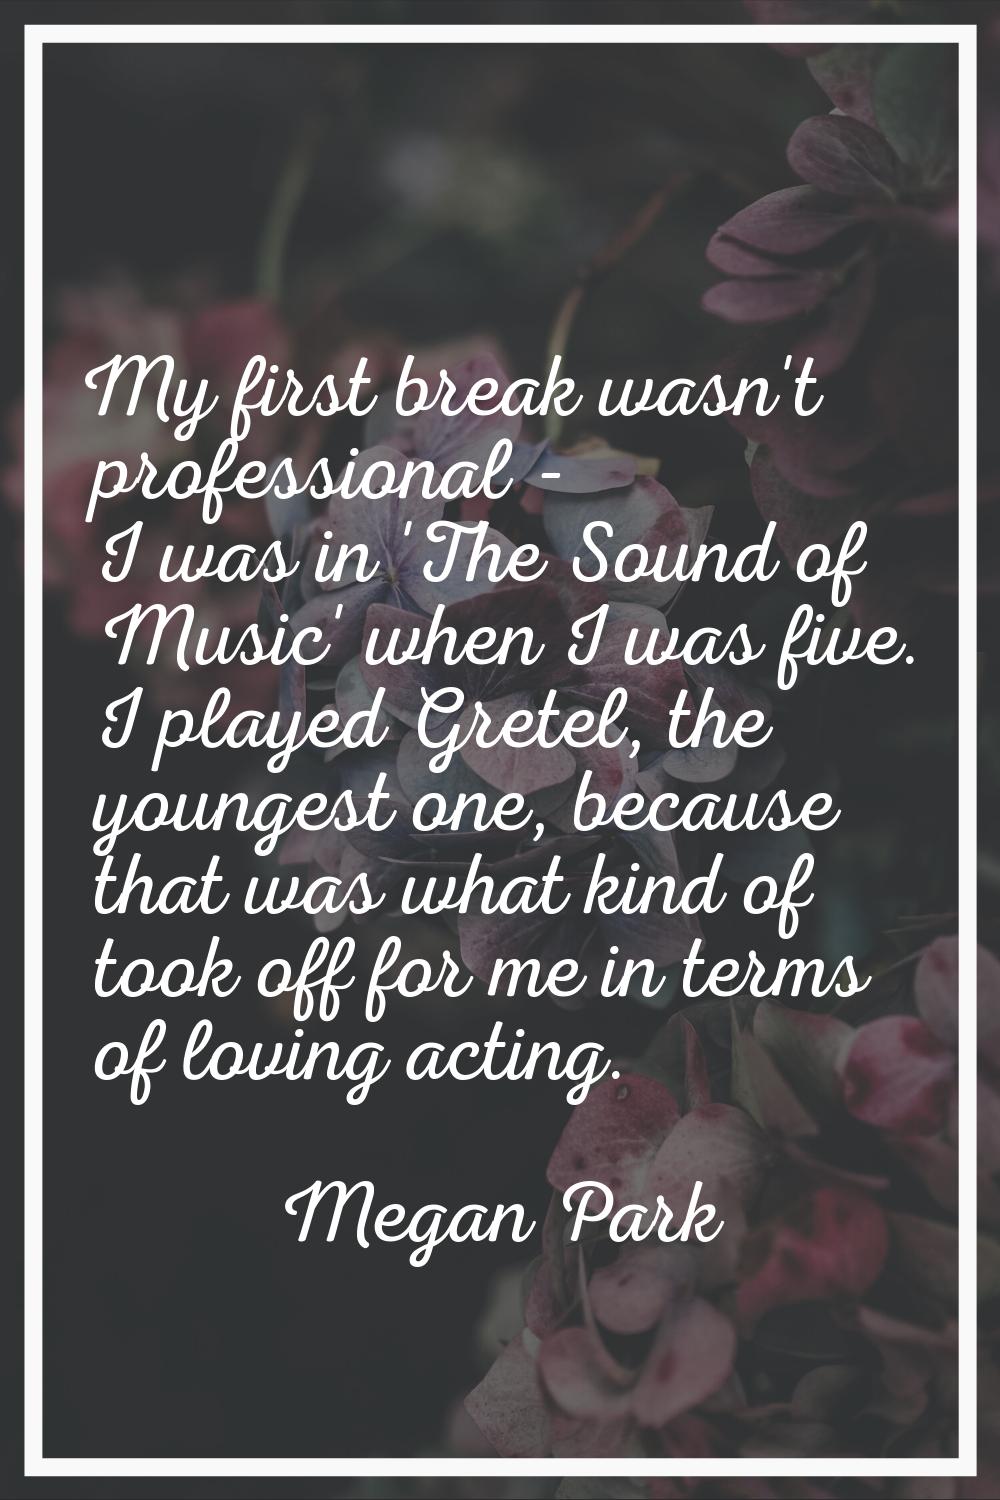 My first break wasn't professional - I was in 'The Sound of Music' when I was five. I played Gretel